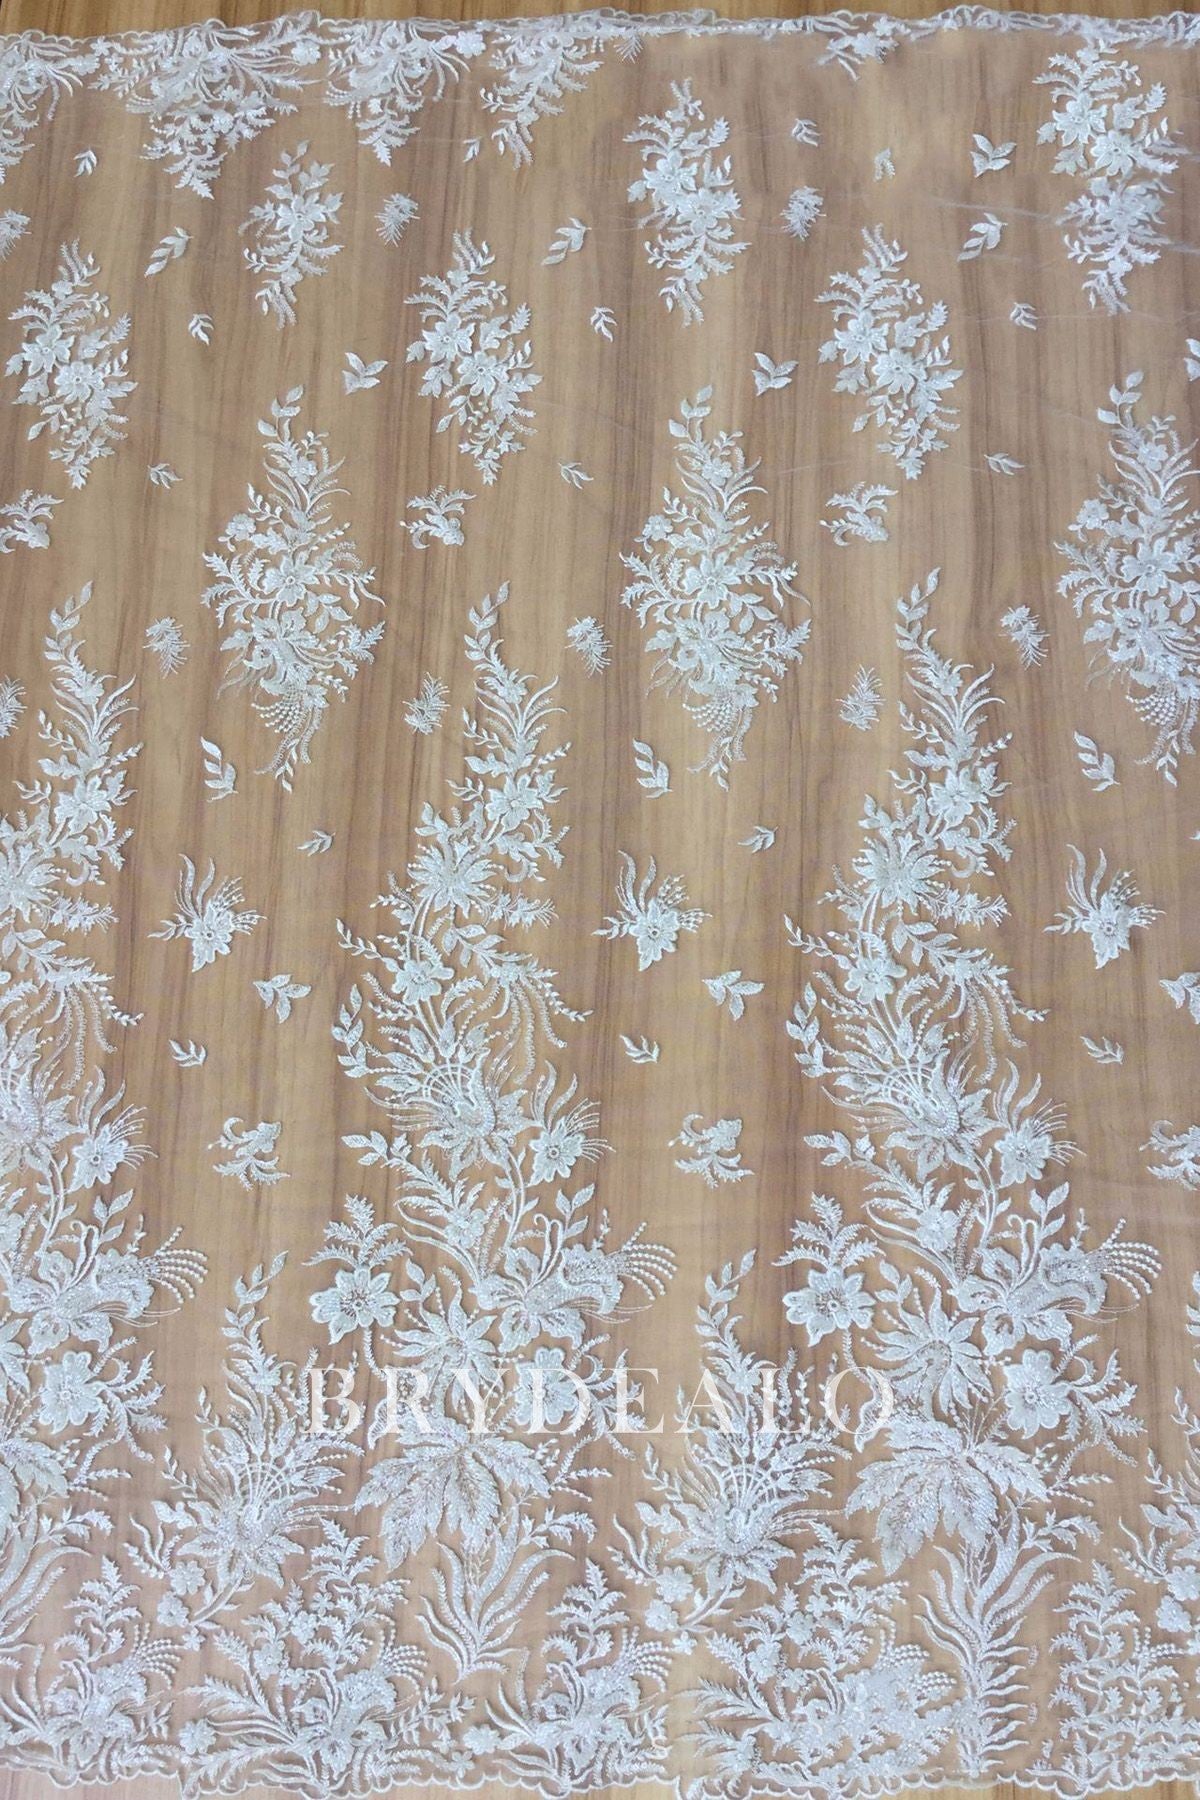 Wholesale Shimmery Beaded Flower Apparel Lace Fabric